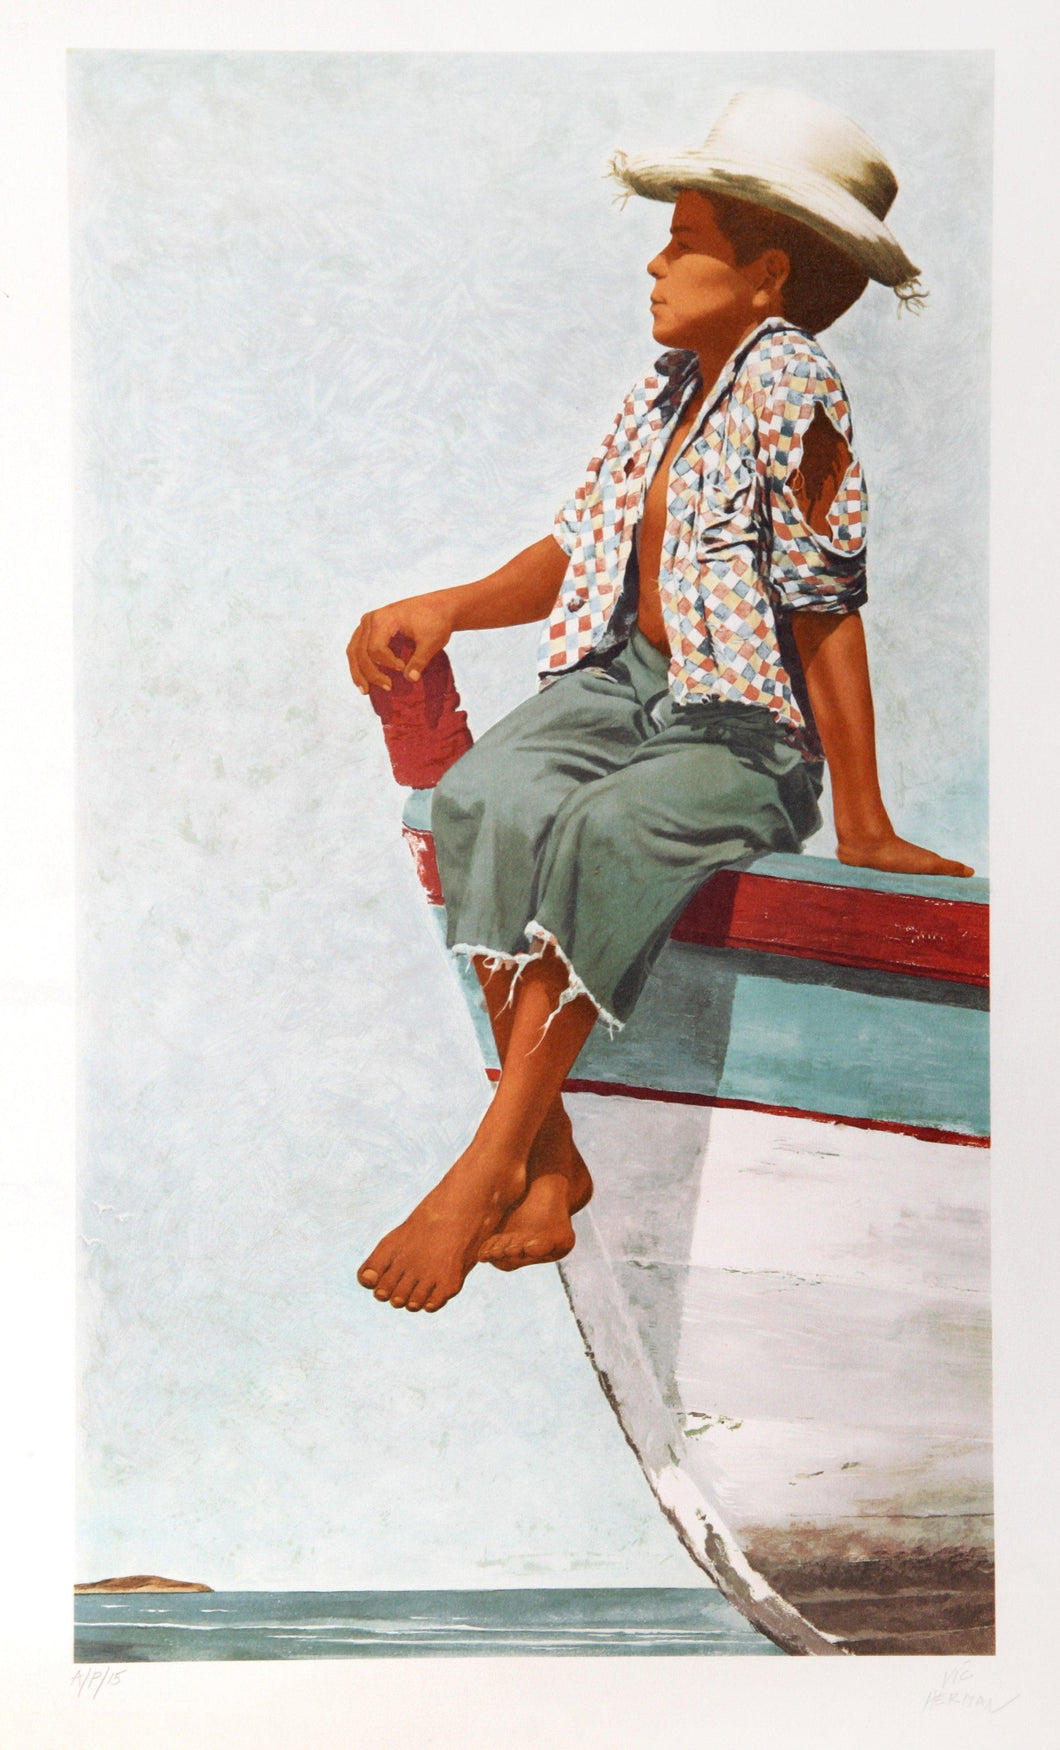 Little Fisherman from Boca del Rio Lithograph | Vic Herman,{{product.type}}